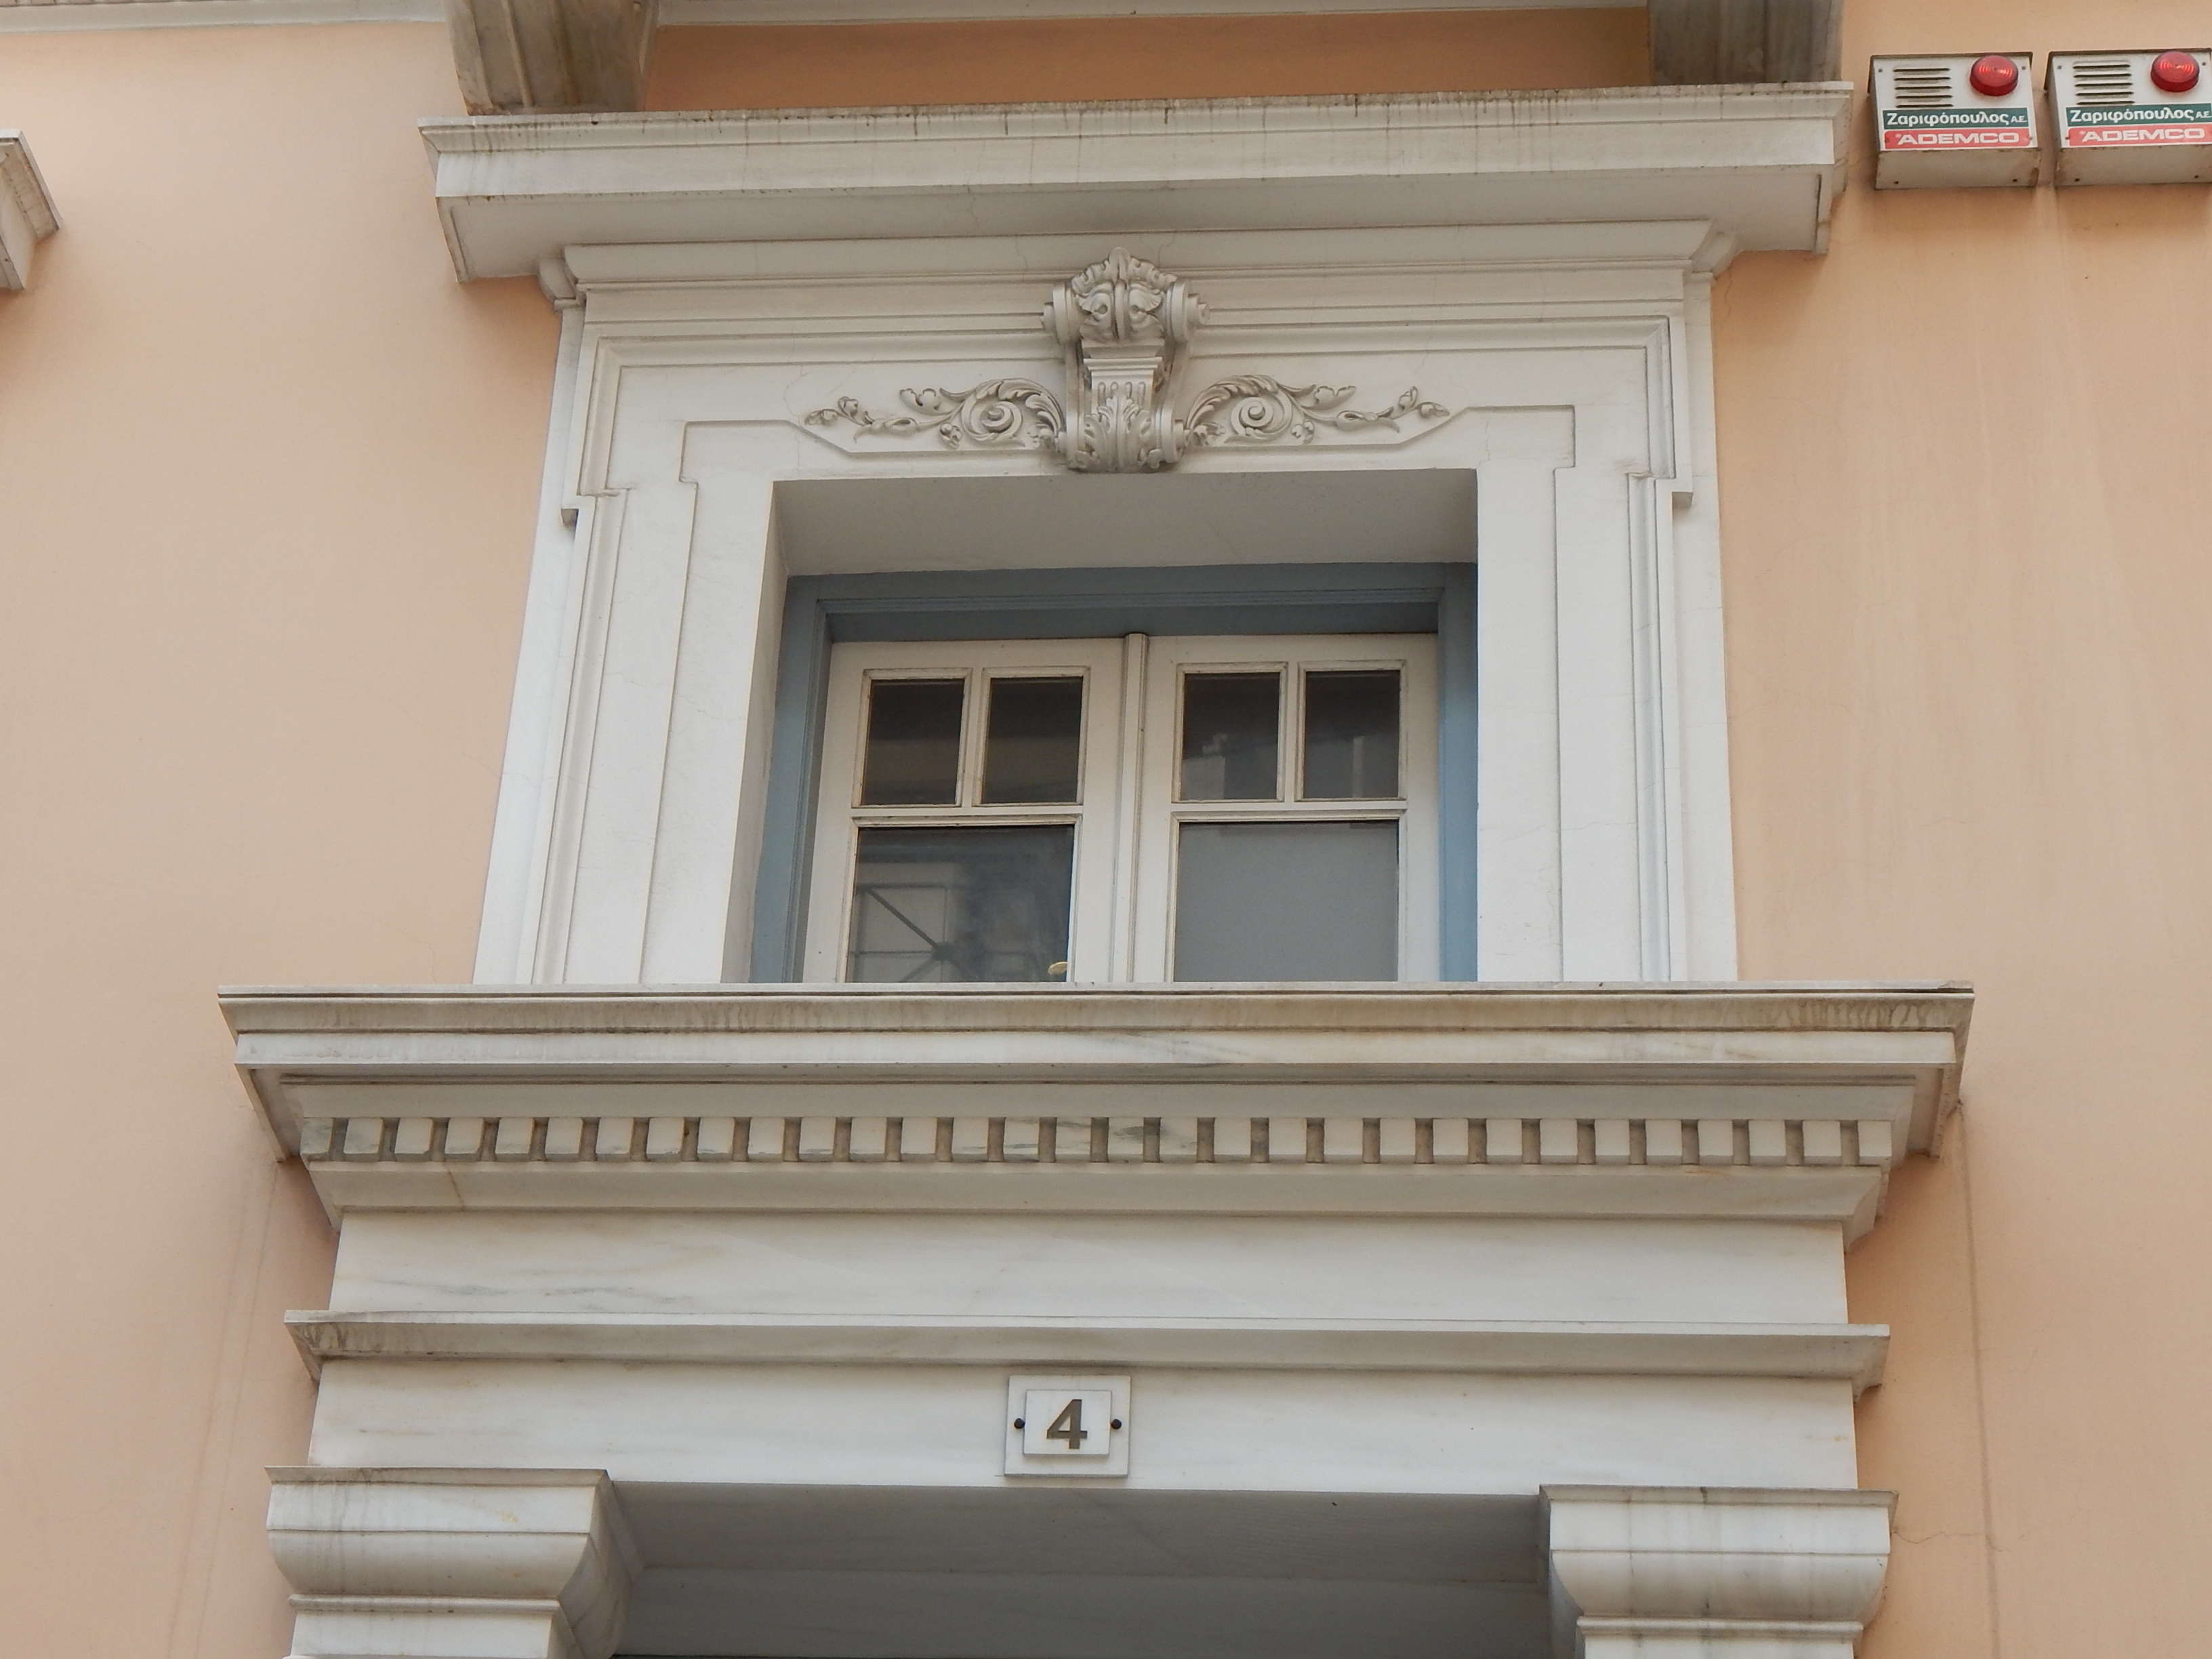 Detail of the building